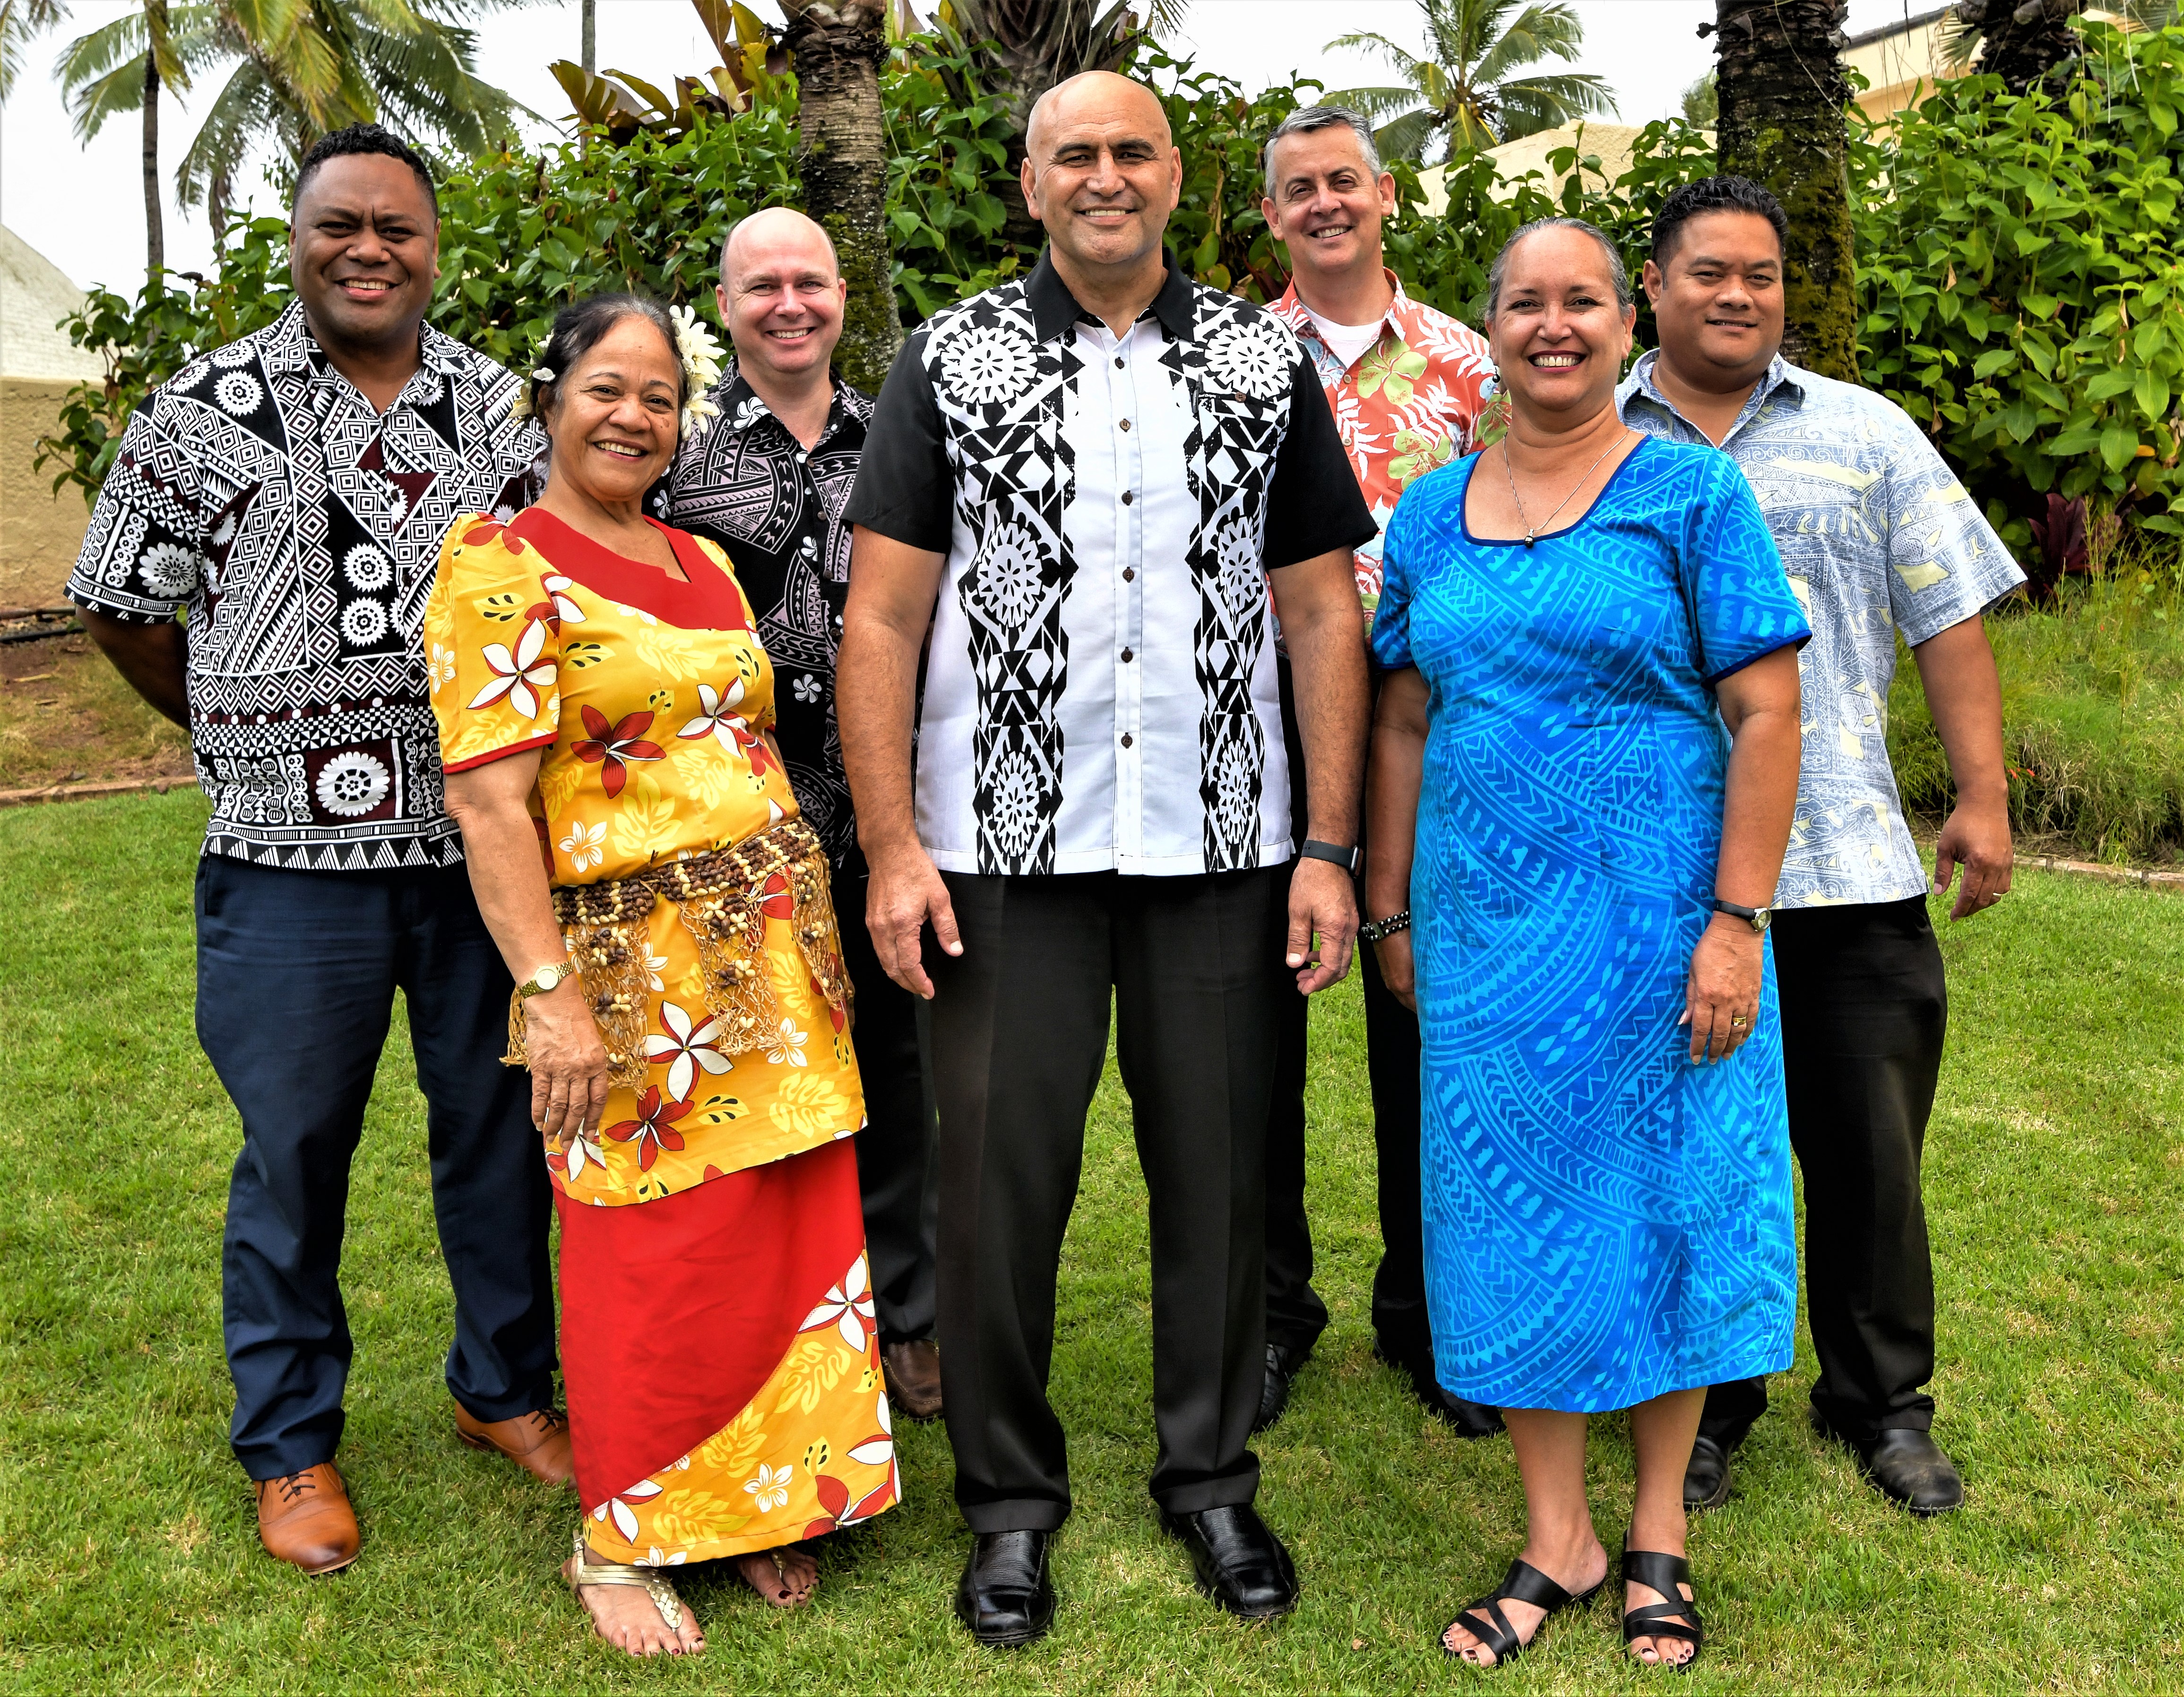 The executive officers of the Polynesian Cultural Center